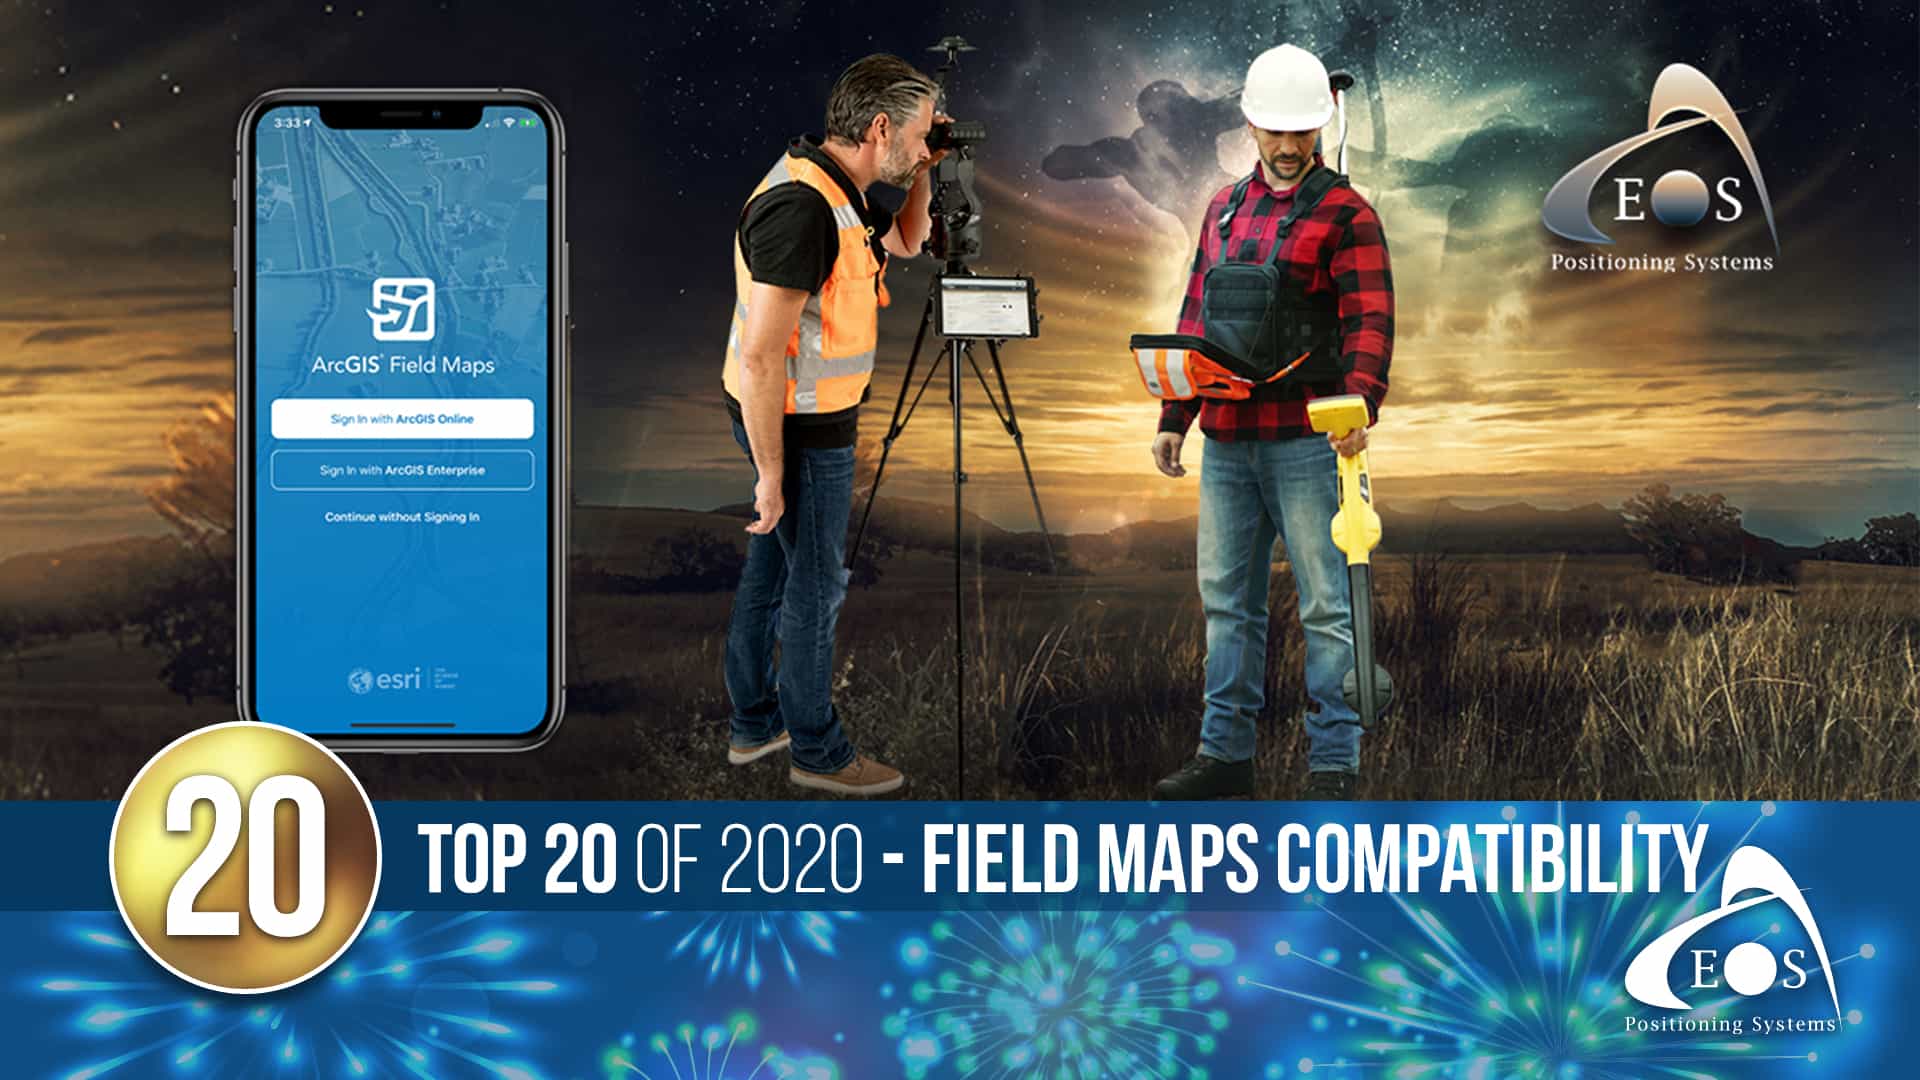 Eos Positioning Systems blog top articles of 2020: 20 - Field Maps Compatibility